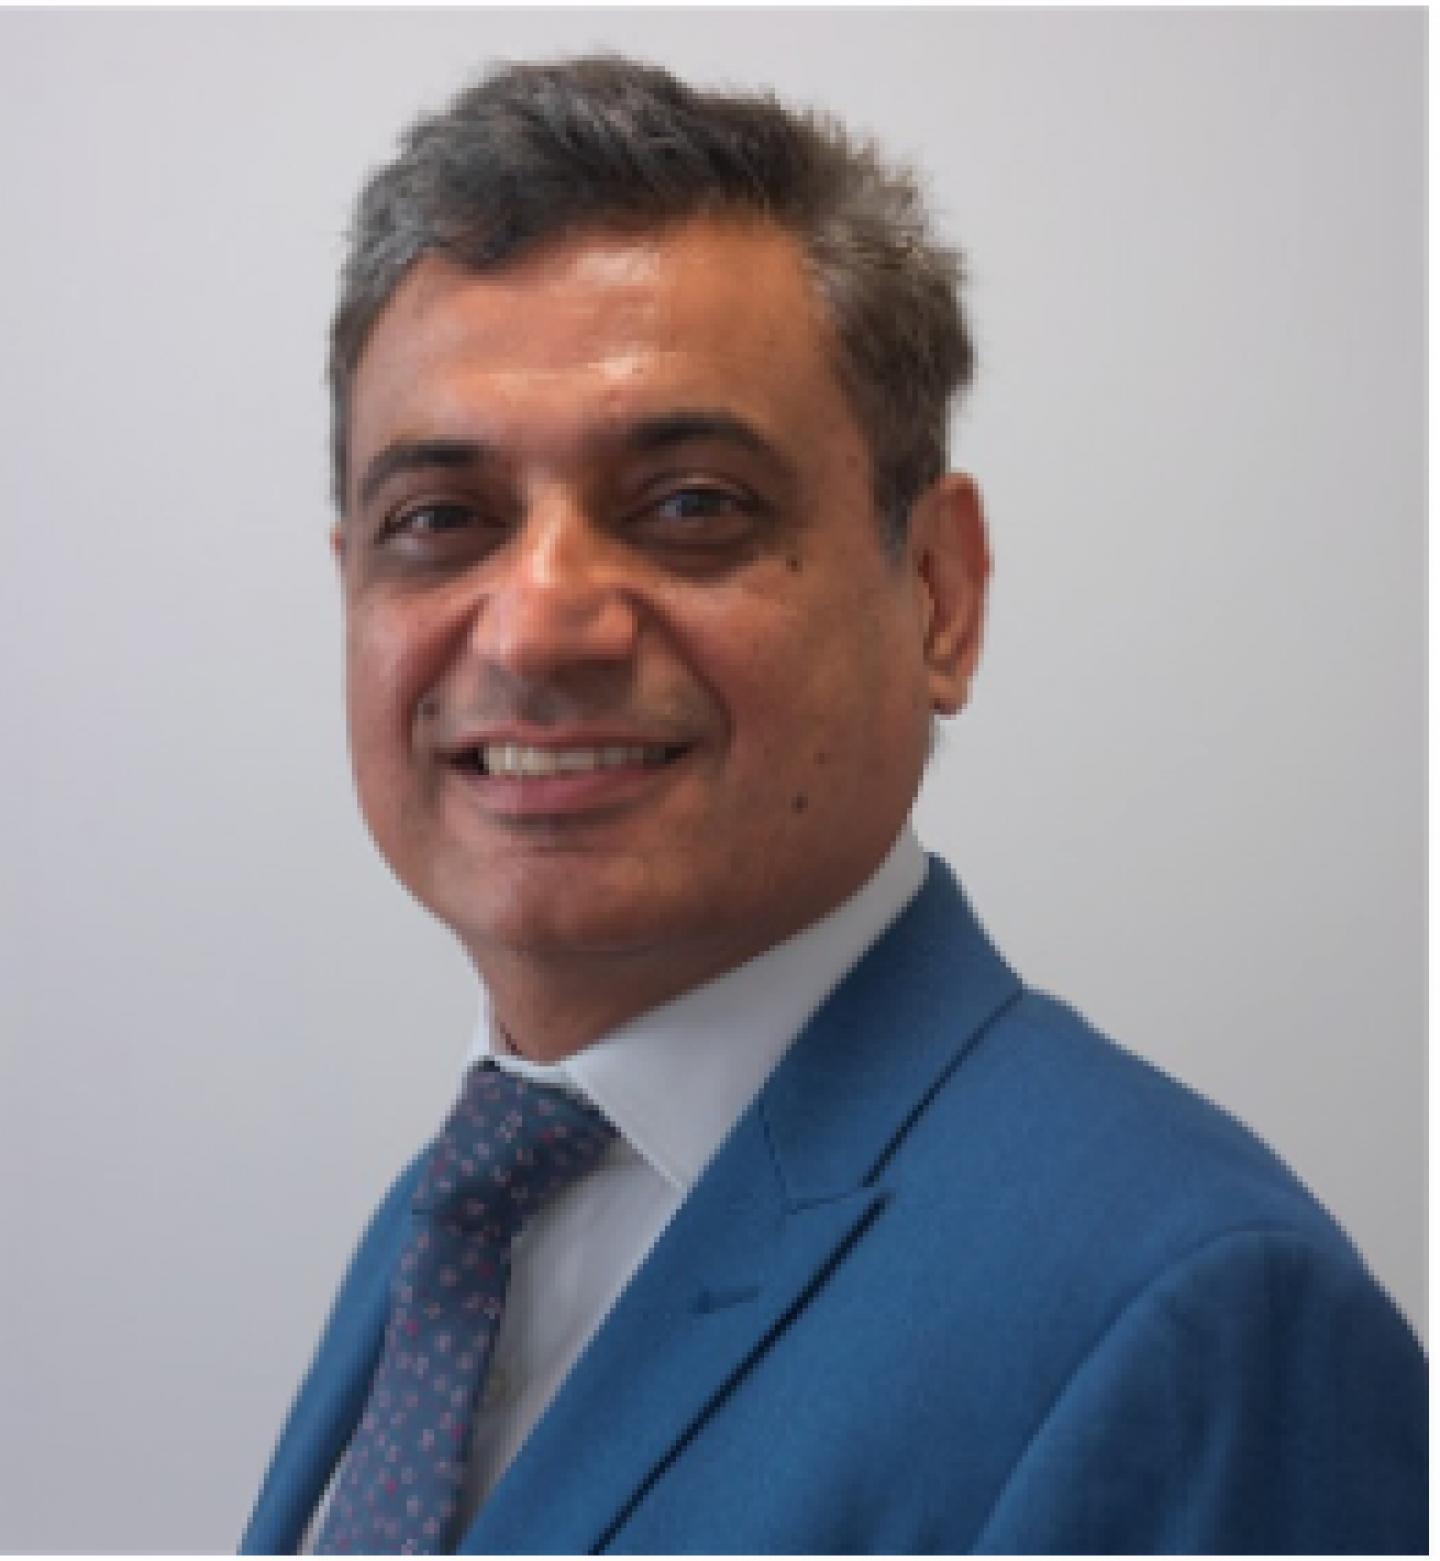 Headshot of Vivek Mehta, Consultant in Pain and Neuromodulation at St Bartholomew’s Hospital and Honorary Reader at Queen Mary University, London.